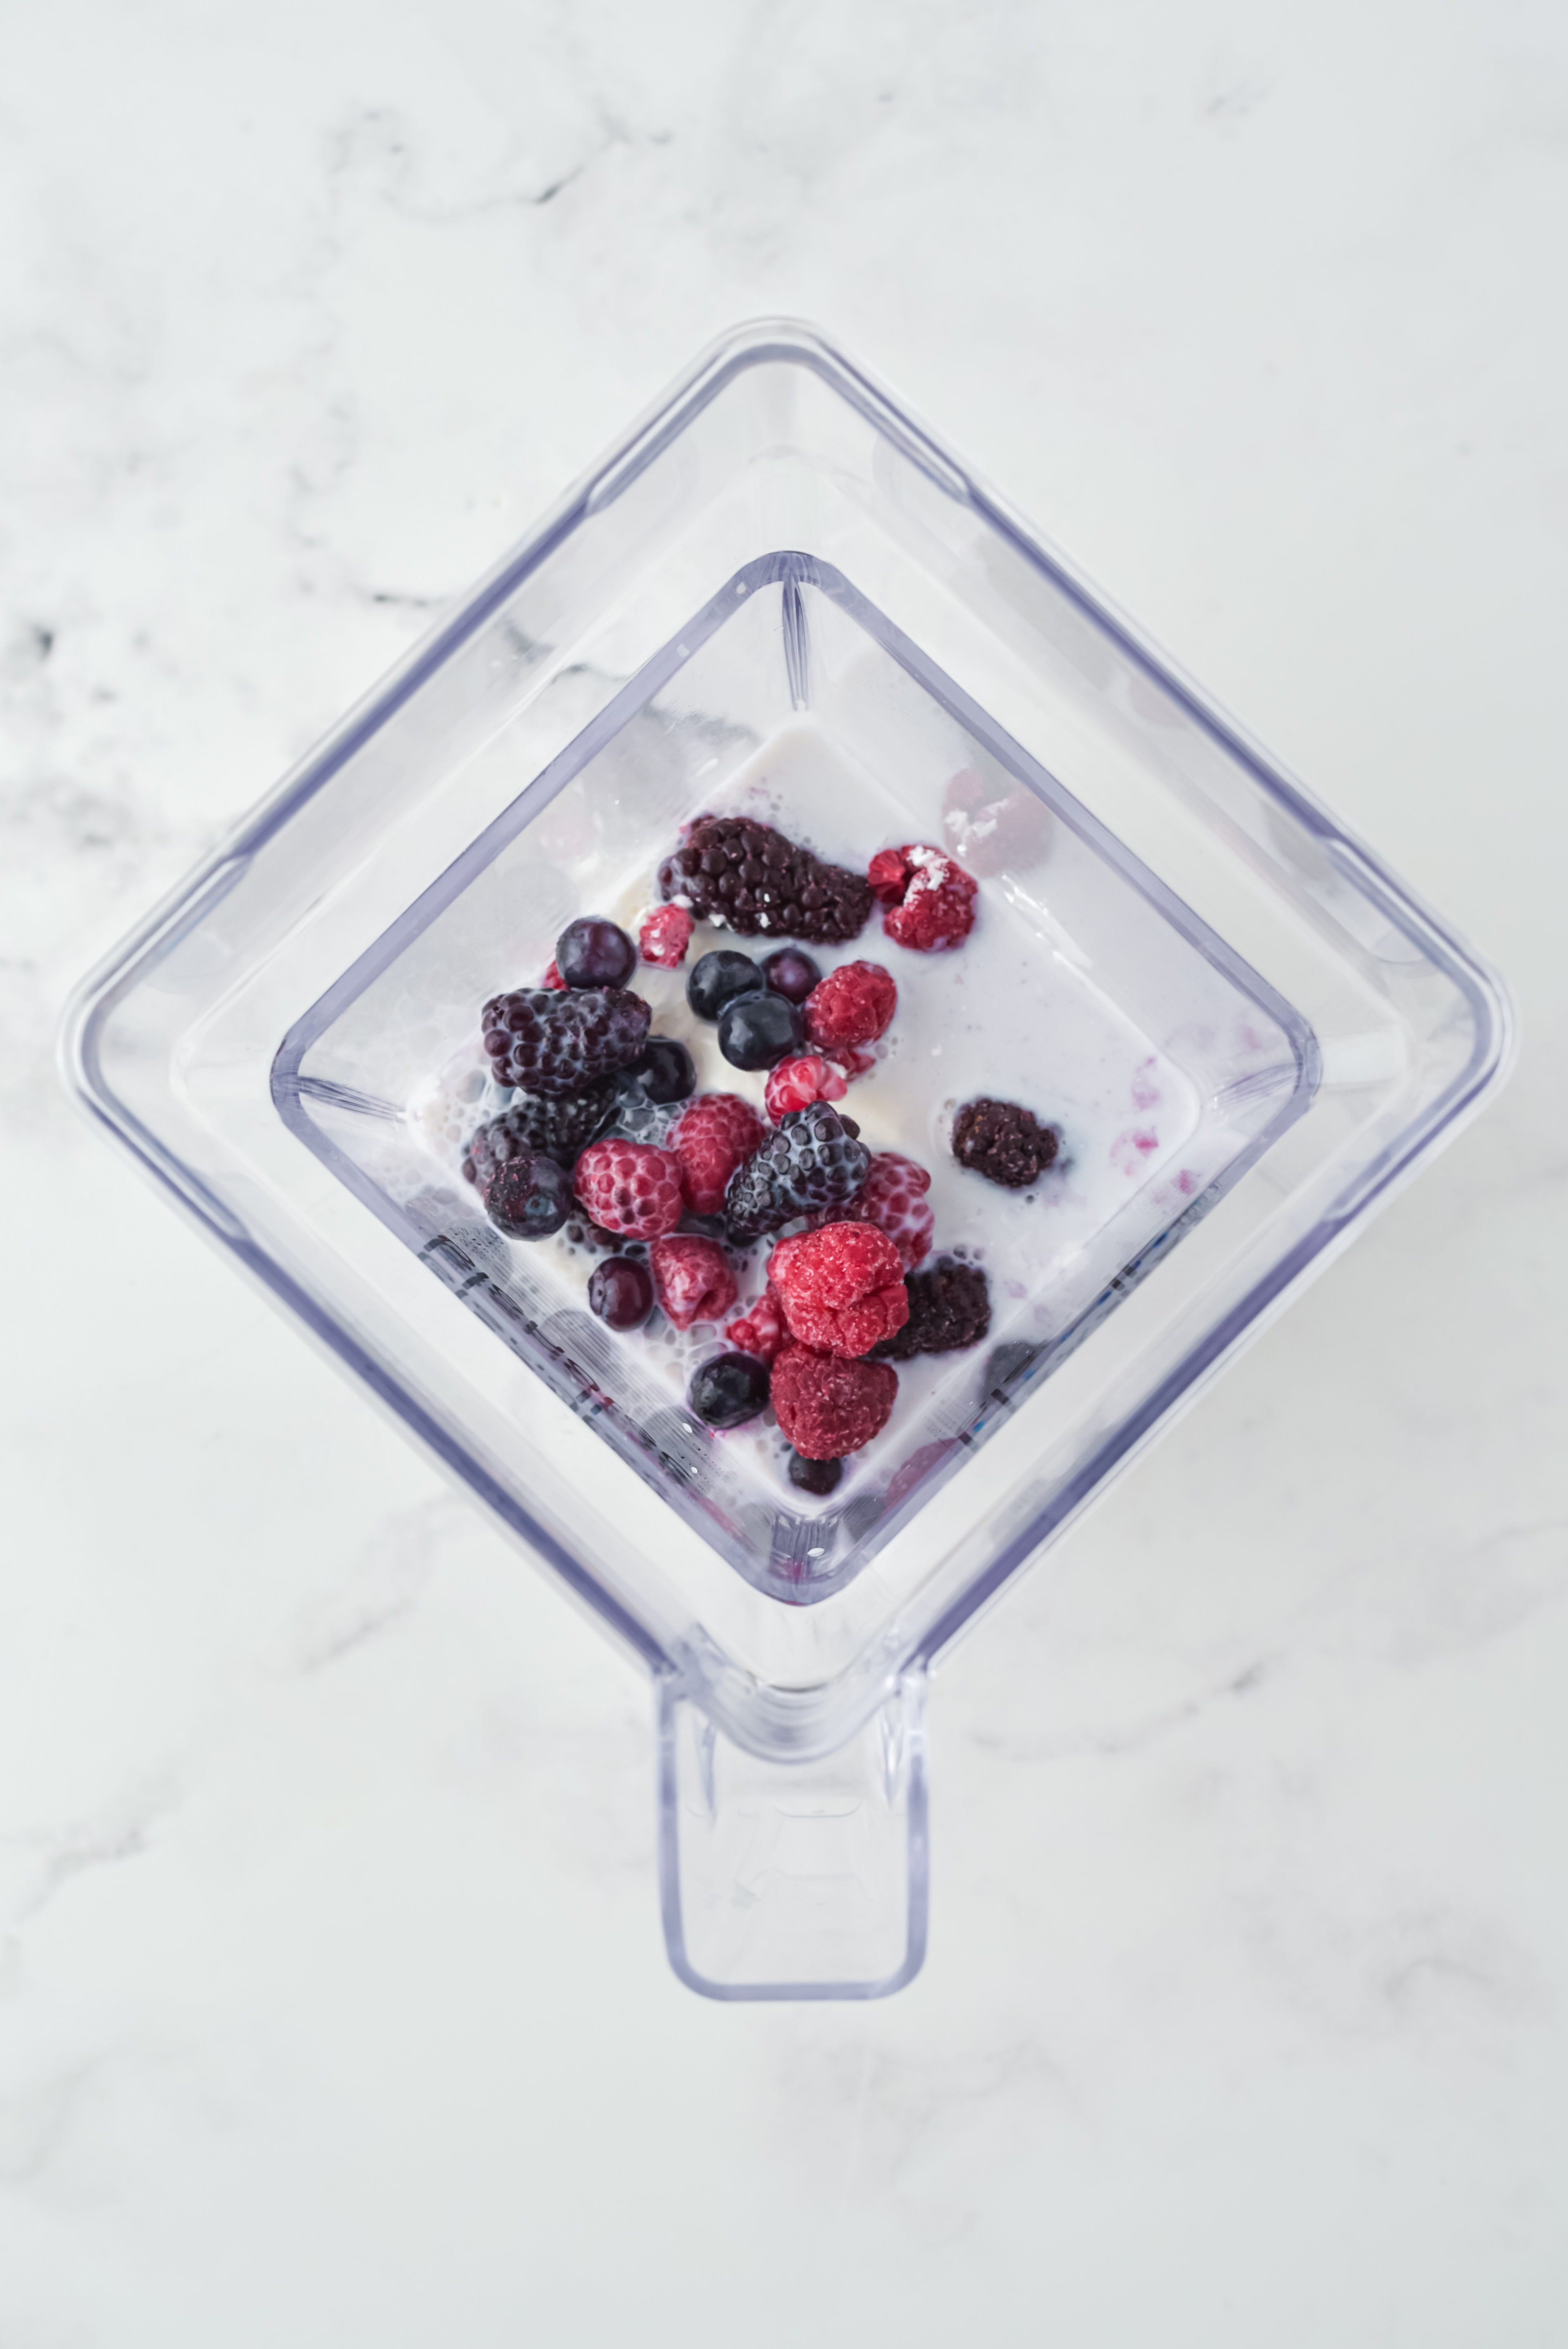 Top view of blender with frozen berries, yoghurt and cool whip in it. 